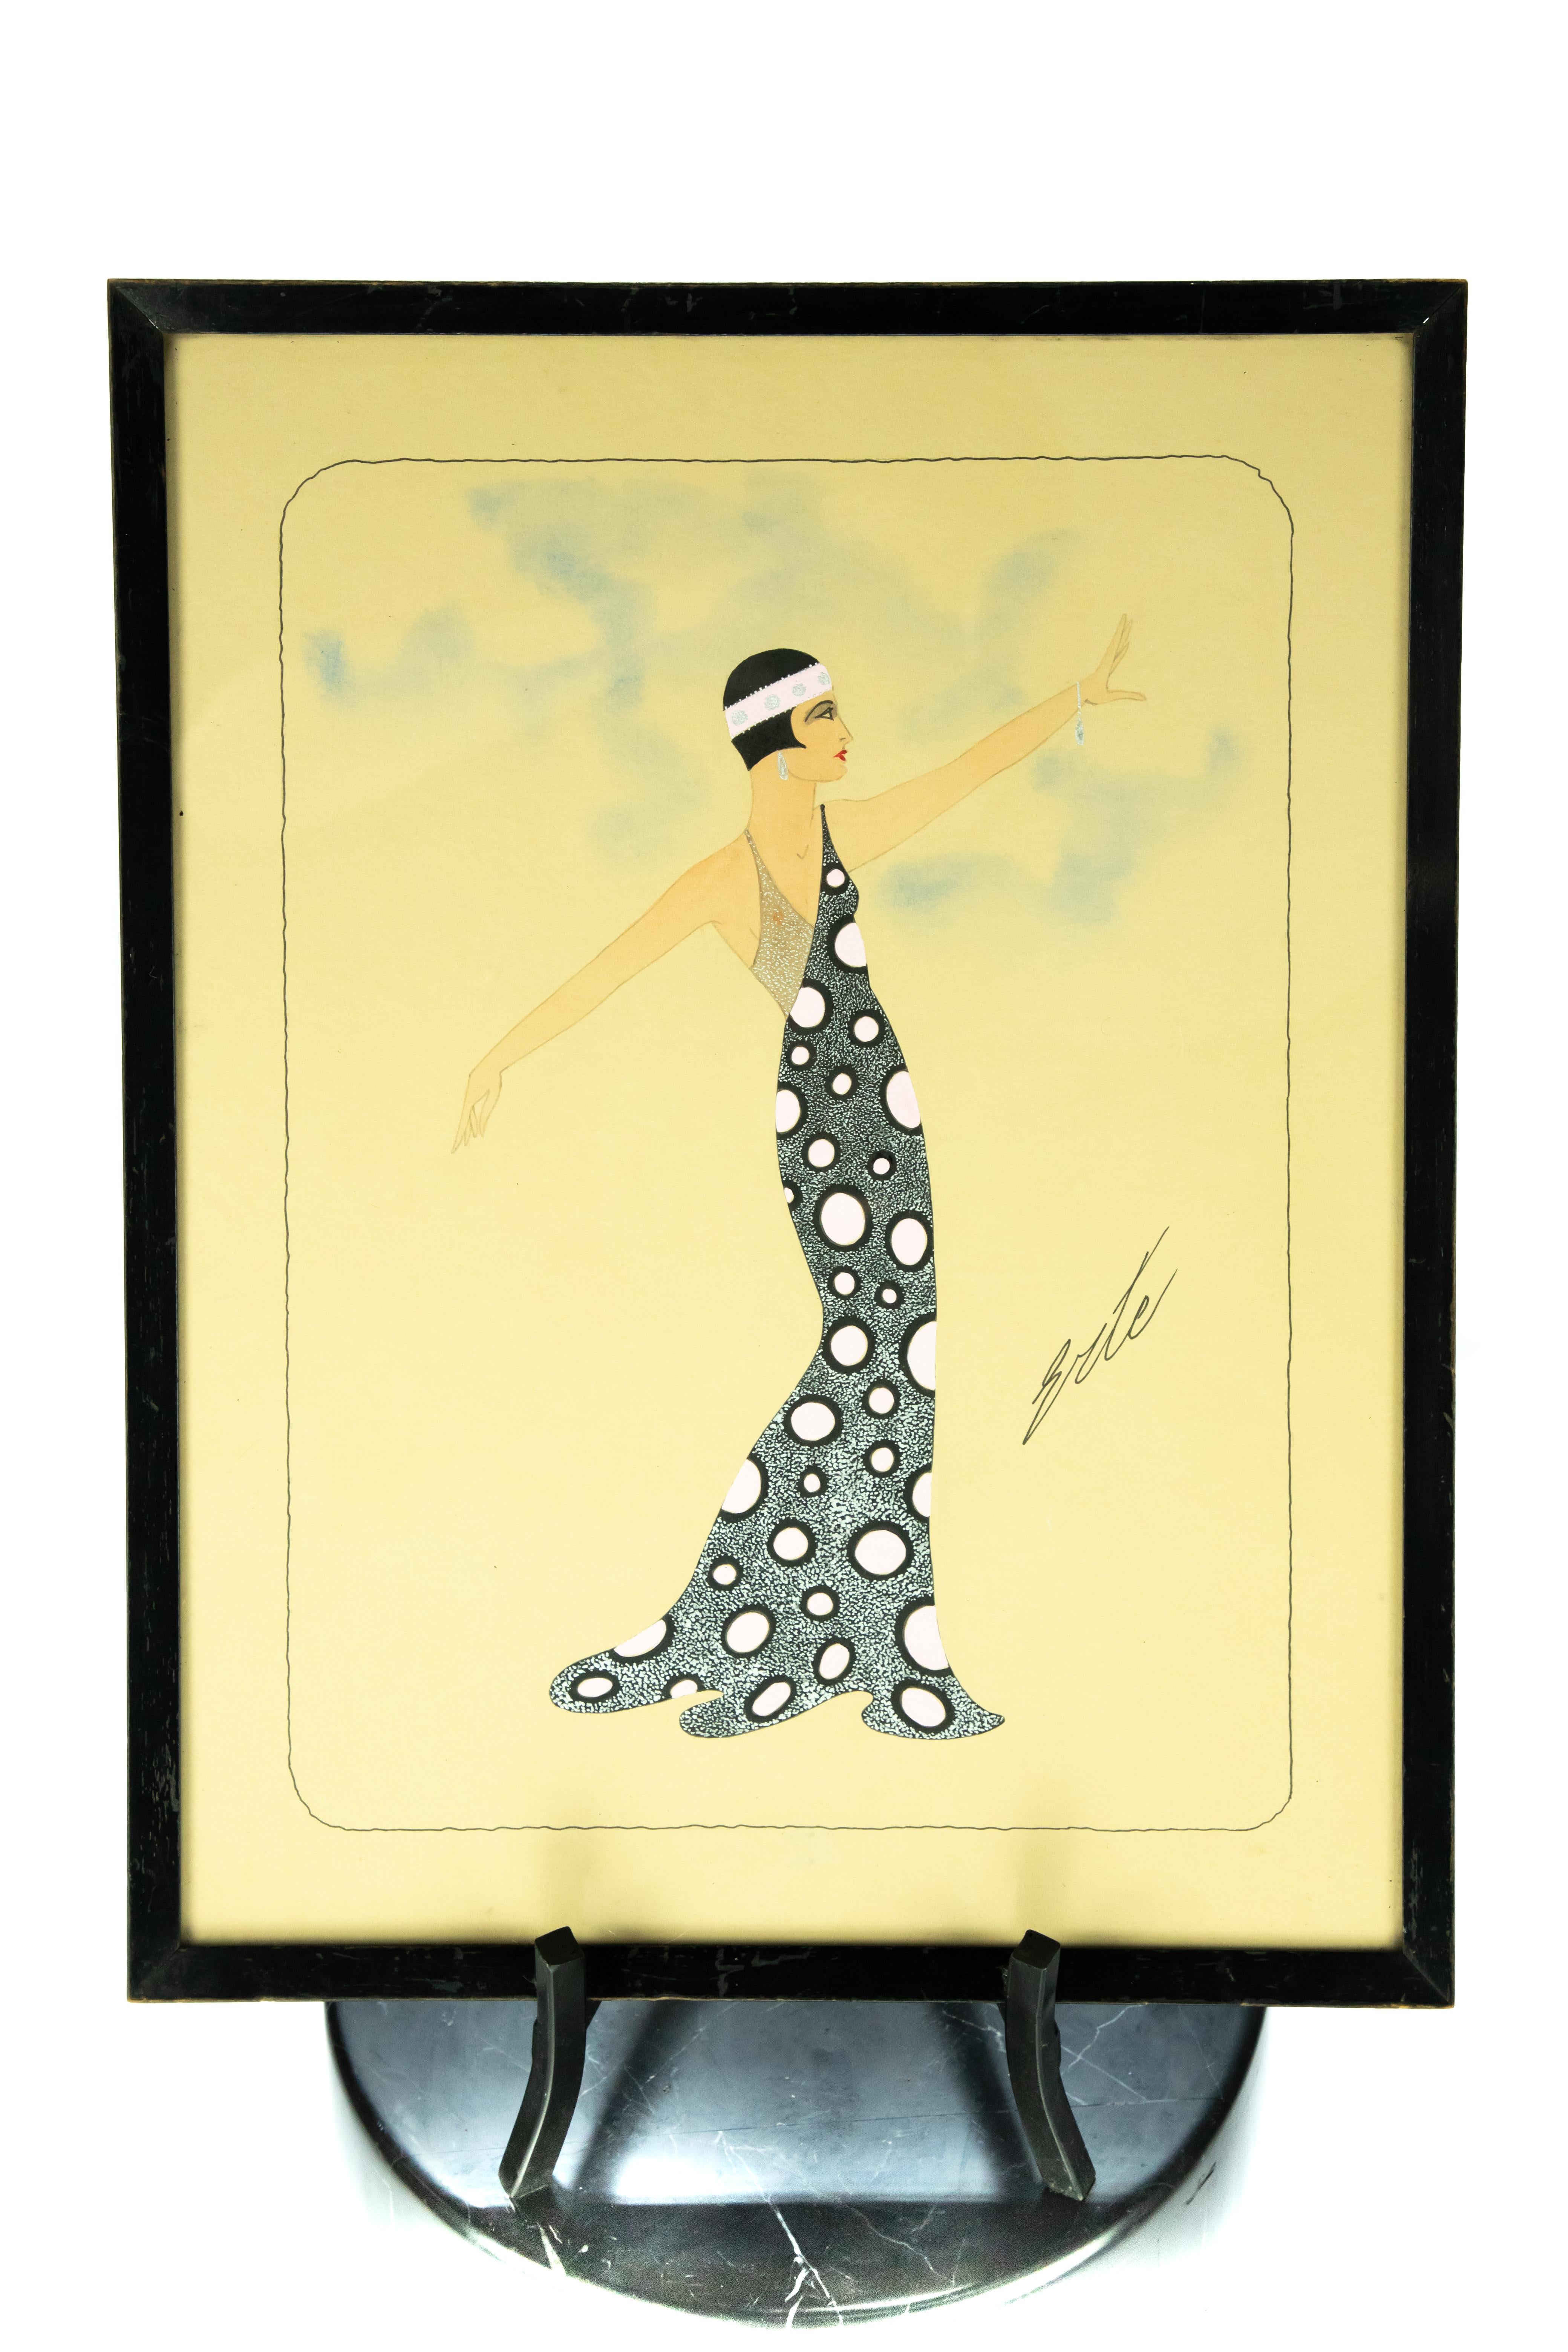 Erté was a Russian artist and designer known for his glamorous opera sets, jewelry, costumes, and graphic arts. His work is quintessentially emblematic of the Art Deco style in its use of tapering lines and simplified ornamentation inspired by the